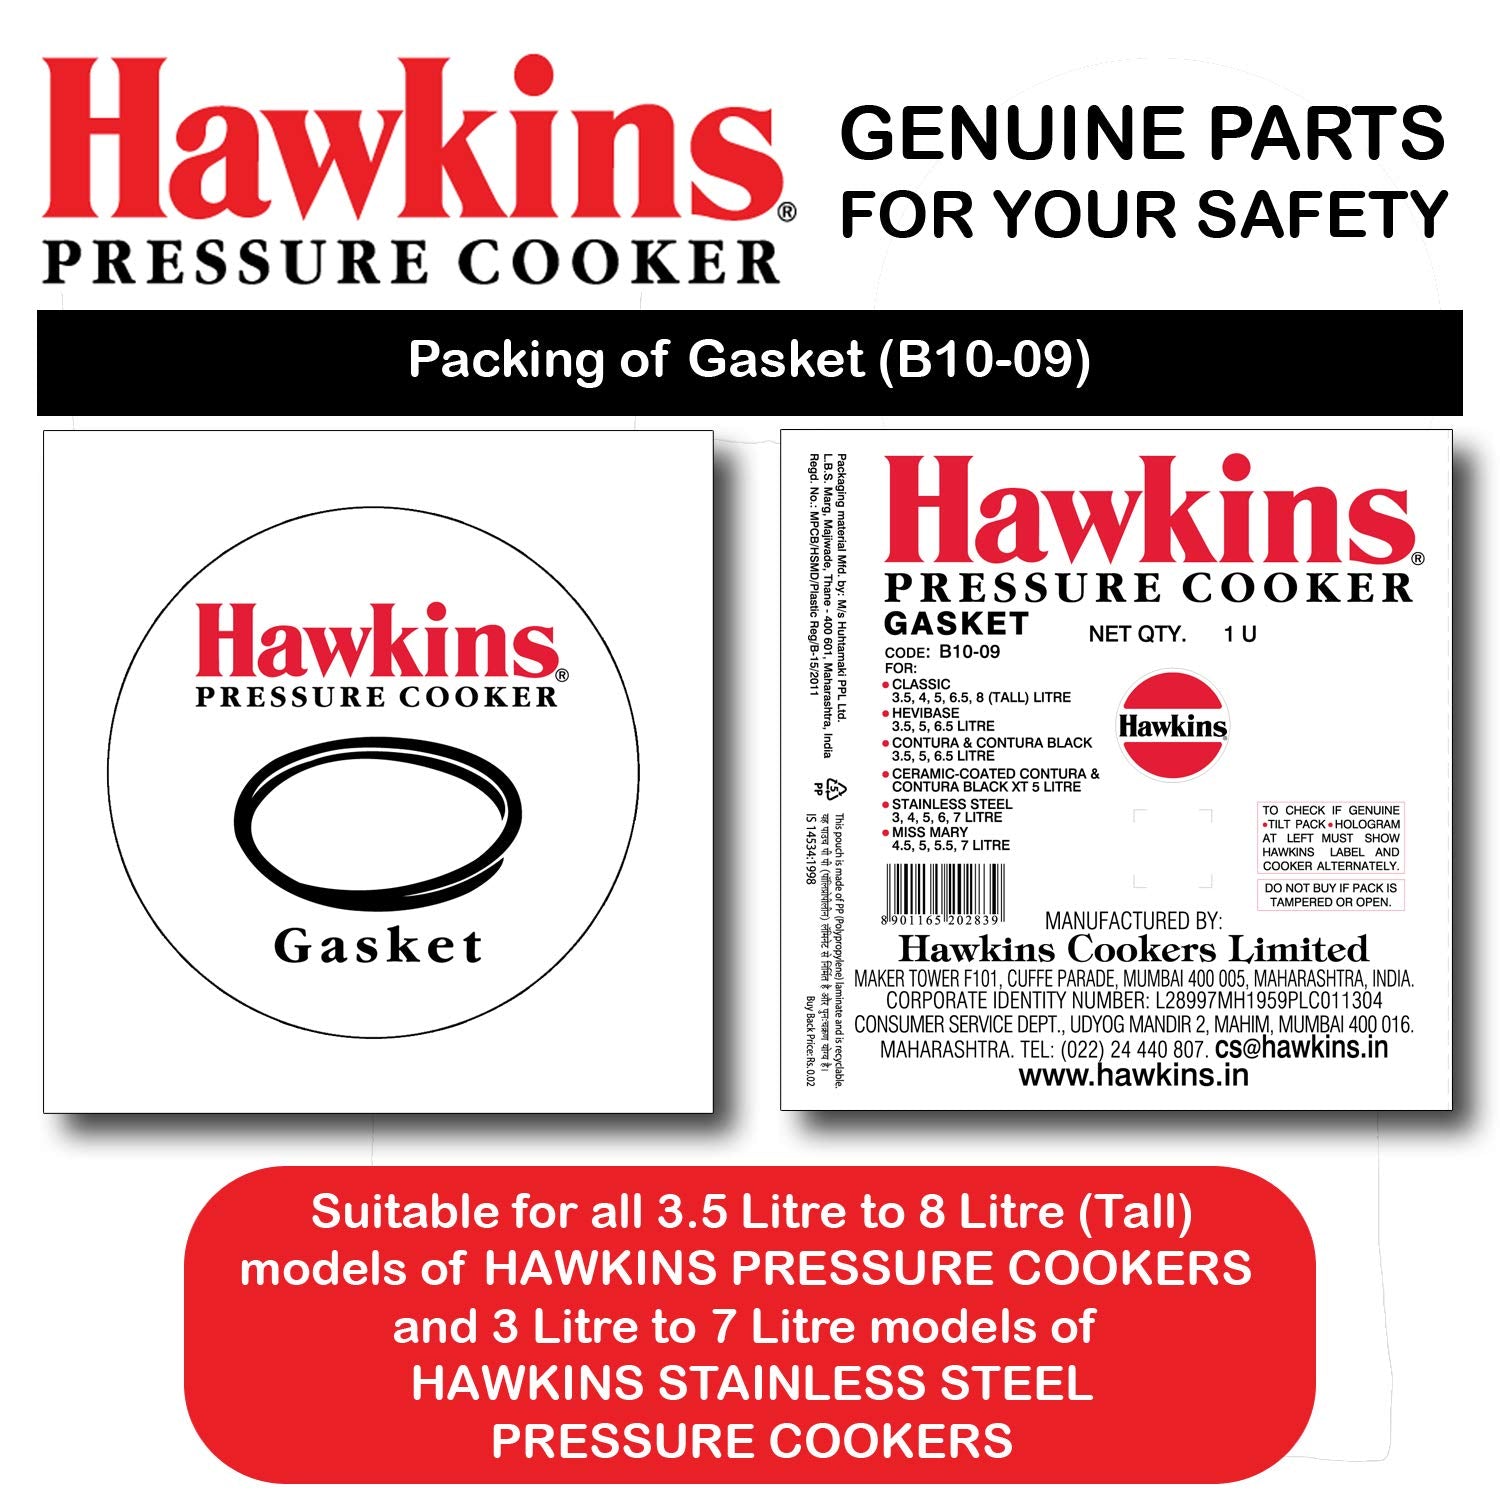 Hawkins Gasket For 3.5 Liter To 8 Litre Except Wide Hawkins Pressure Cookers | 3 Liter To 7 Litre Hawkins Stainless Steel Pressure Cookers | 5 Liter Stainless Steel Contura Pressure Cookers (B1009) | Black | 1 Pc